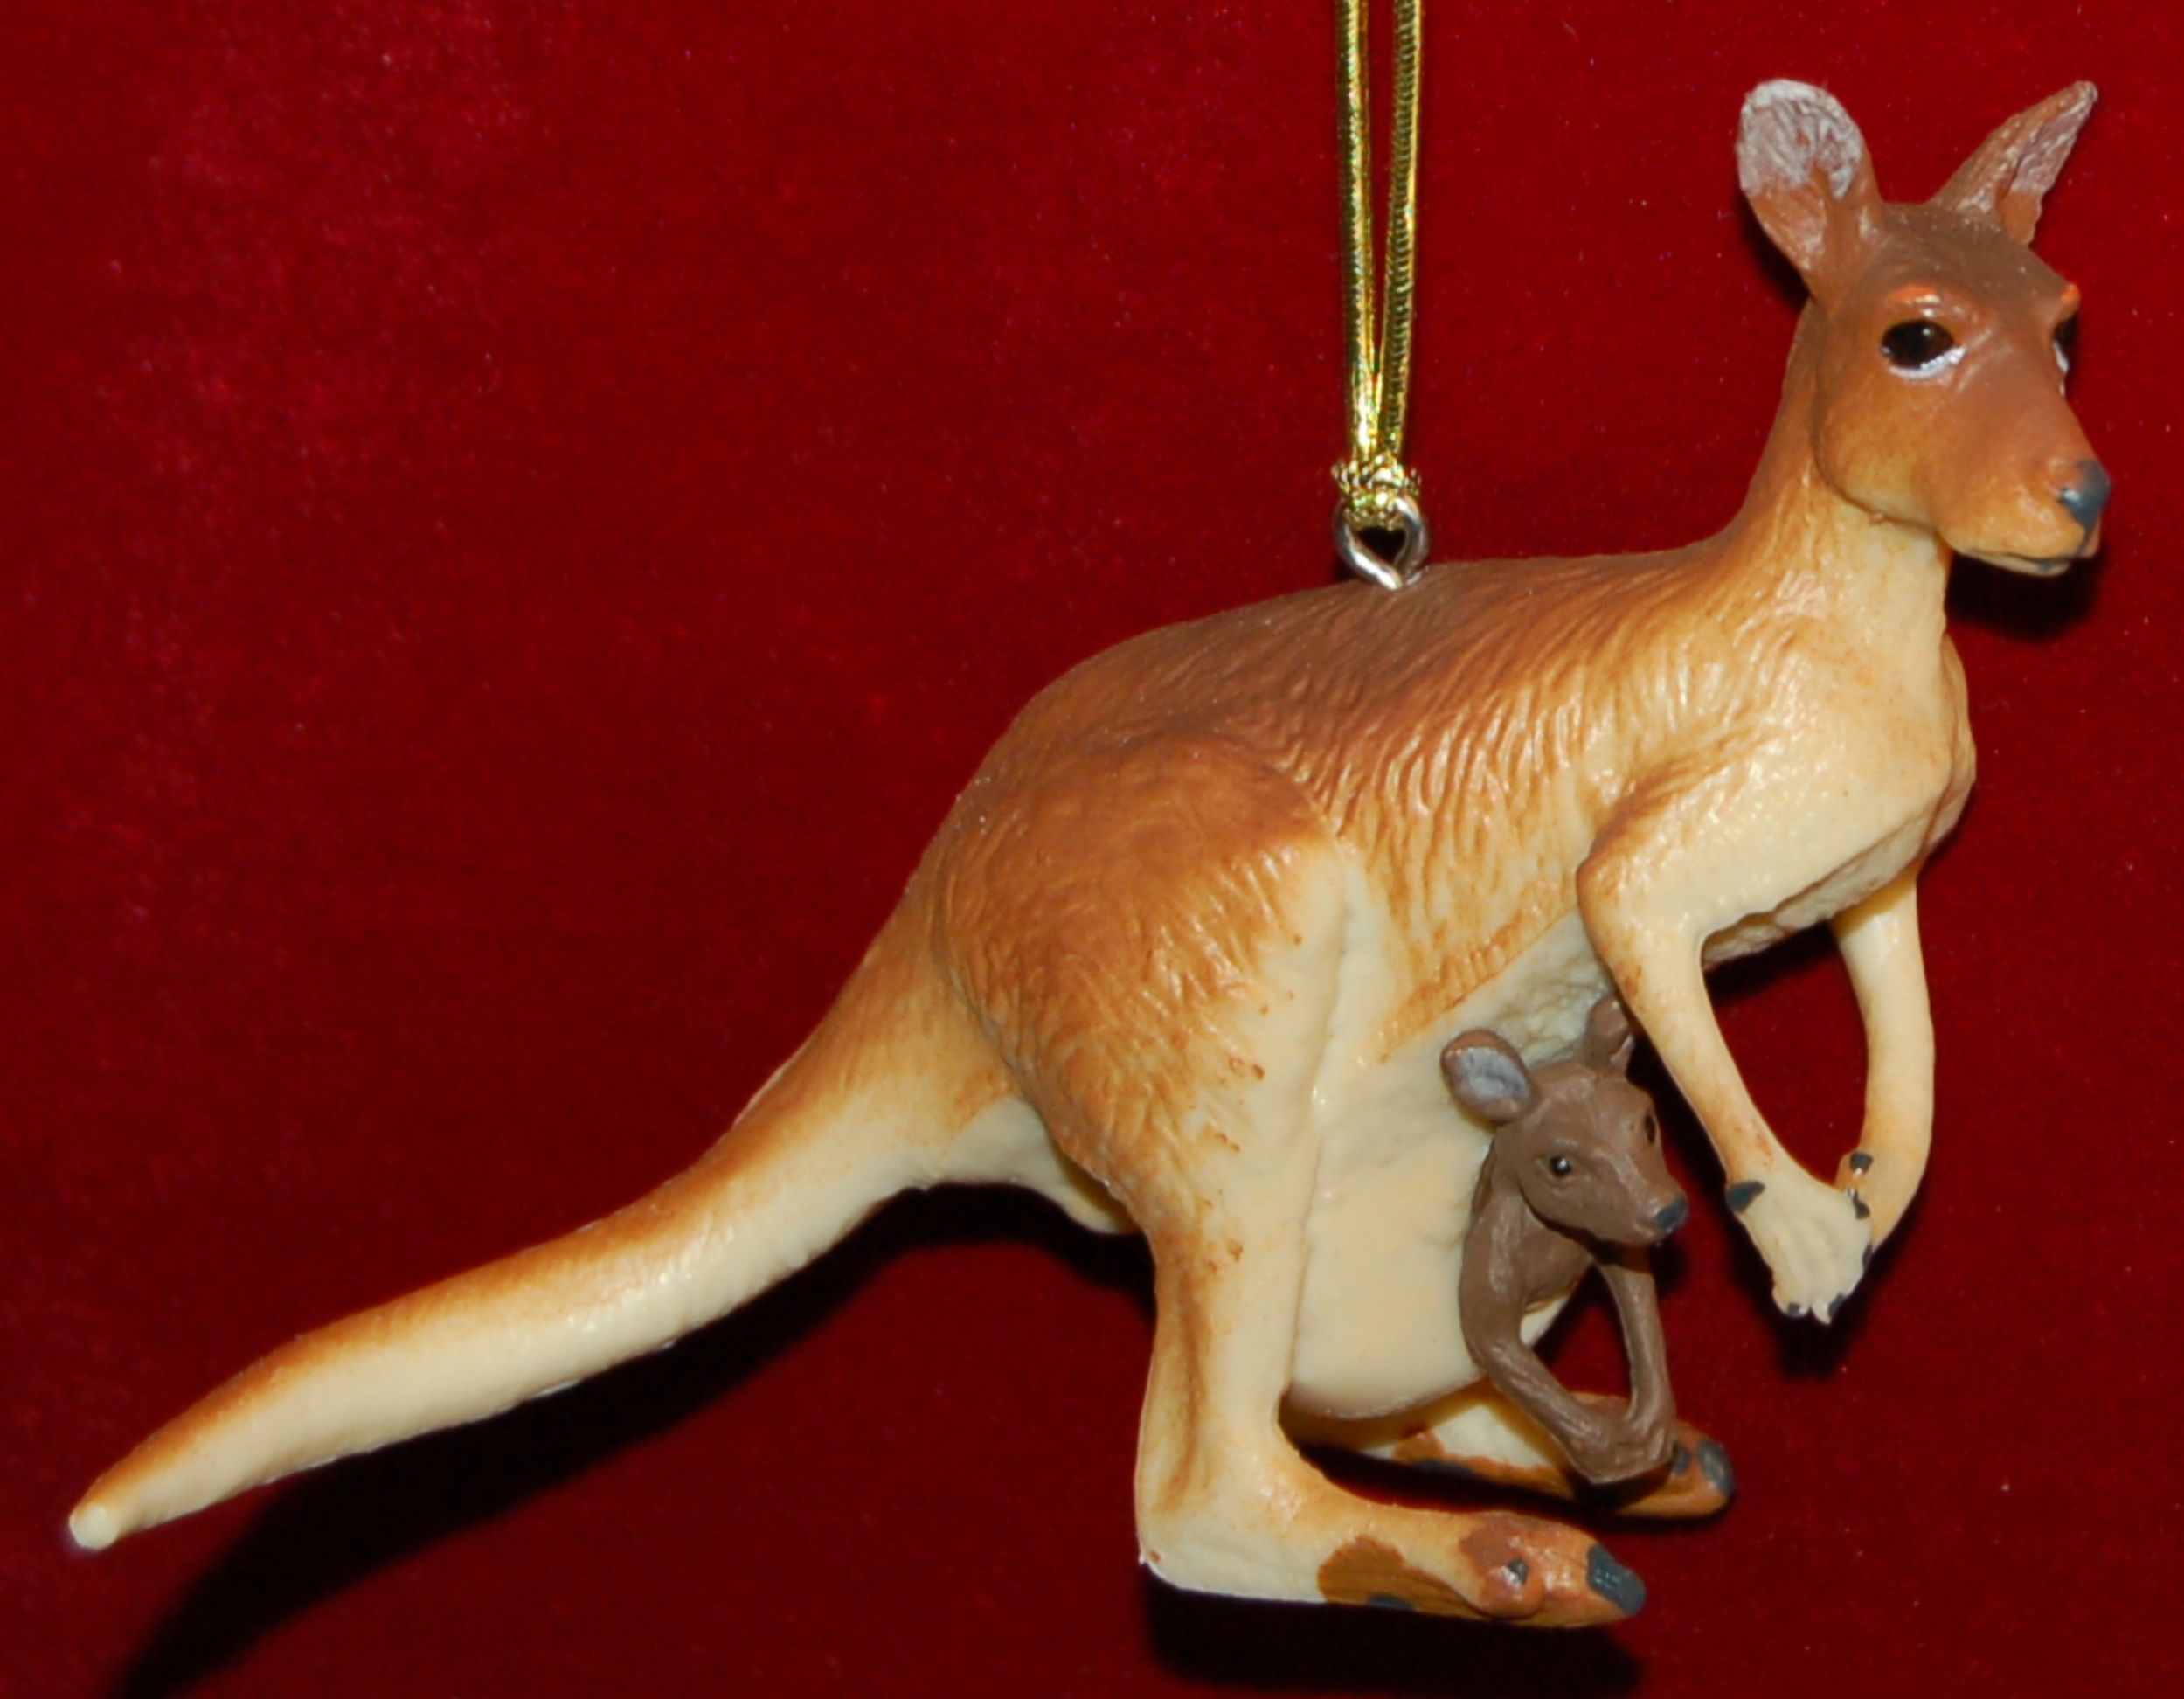 Kangaroo Christmas Ornament with Baby Roo Personalized by RussellRhodes.com